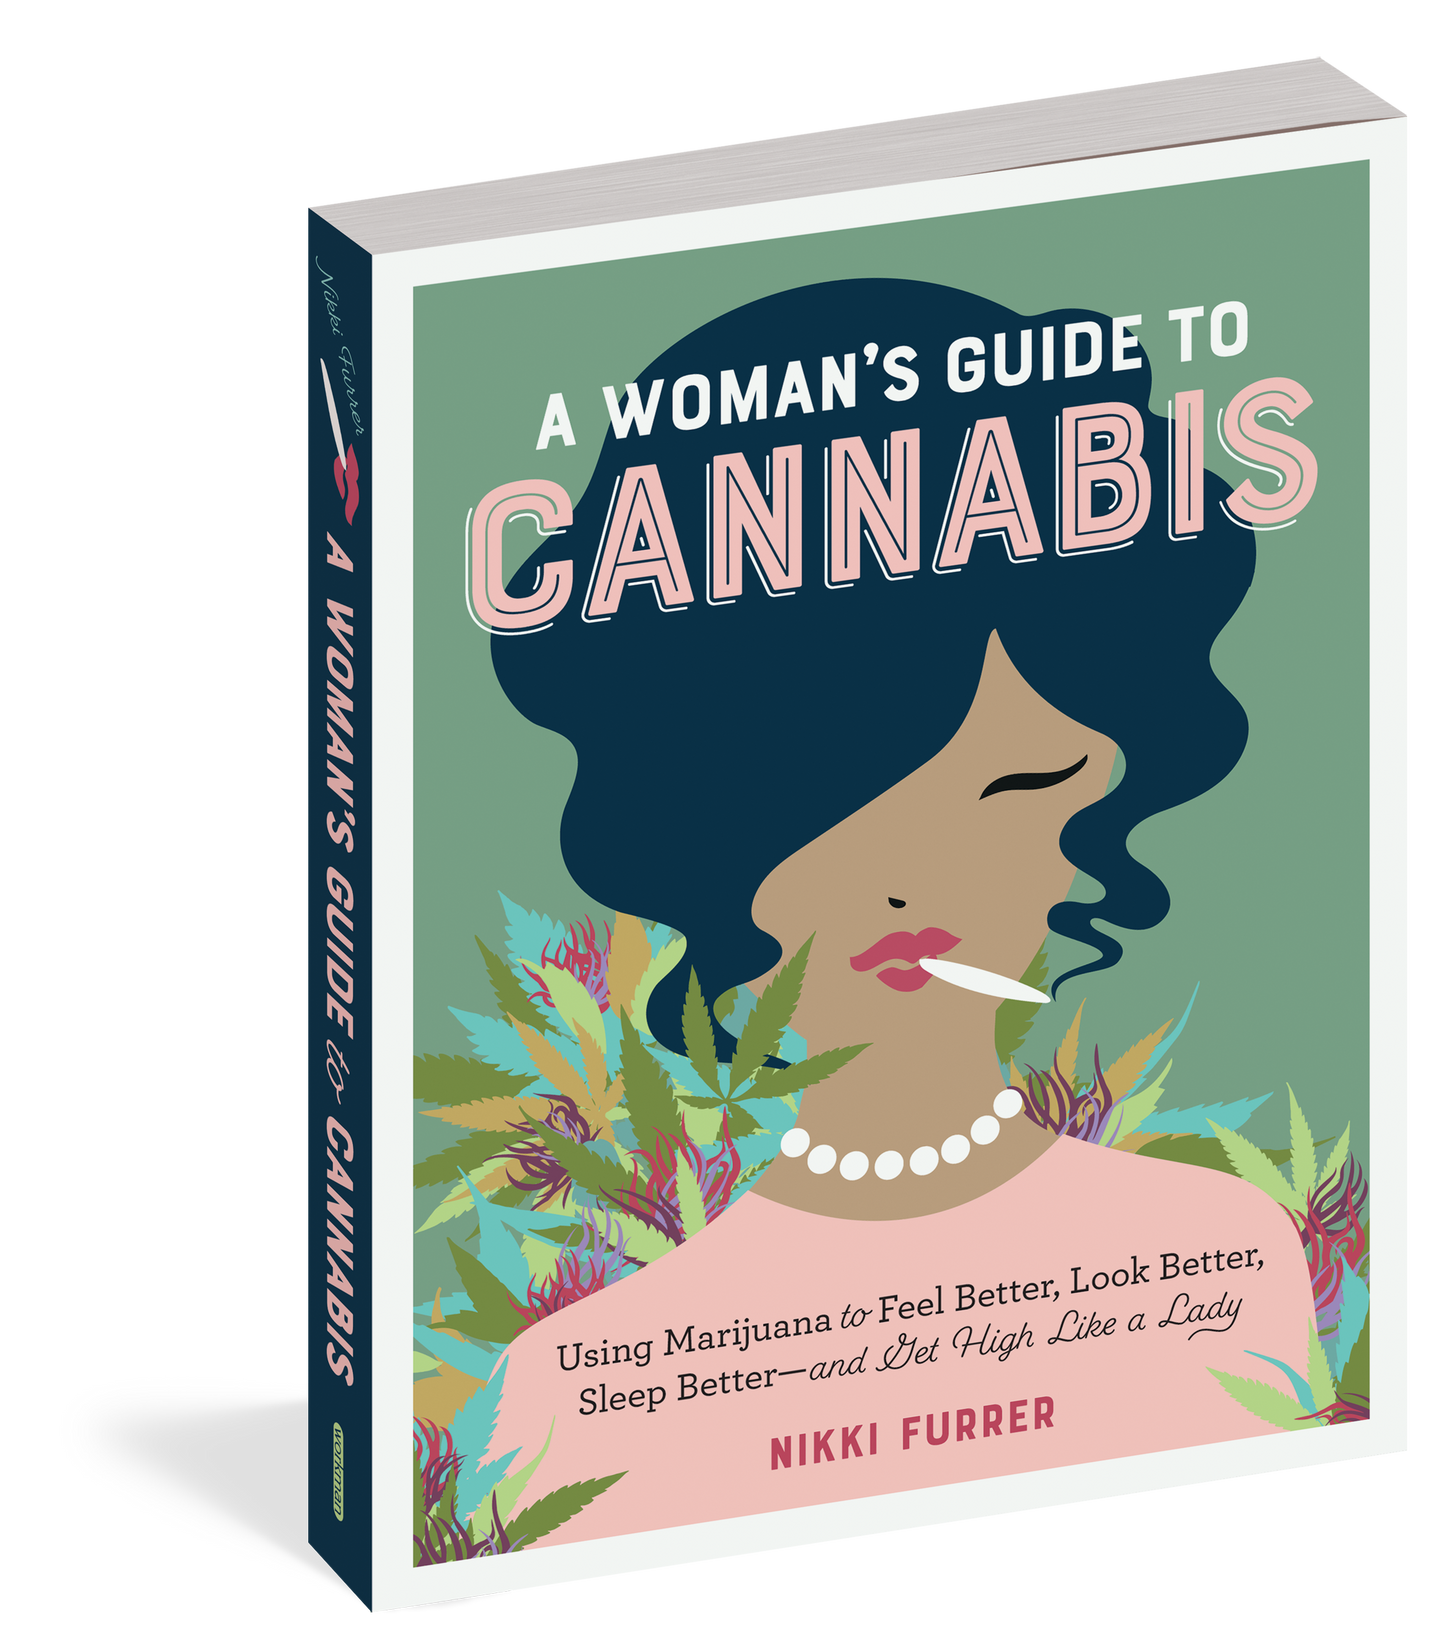 A Woman's Guide to Cannabis: Using Marijuana to Feel Better, Look Better, Sleep Better–and Get High Like a Lady side